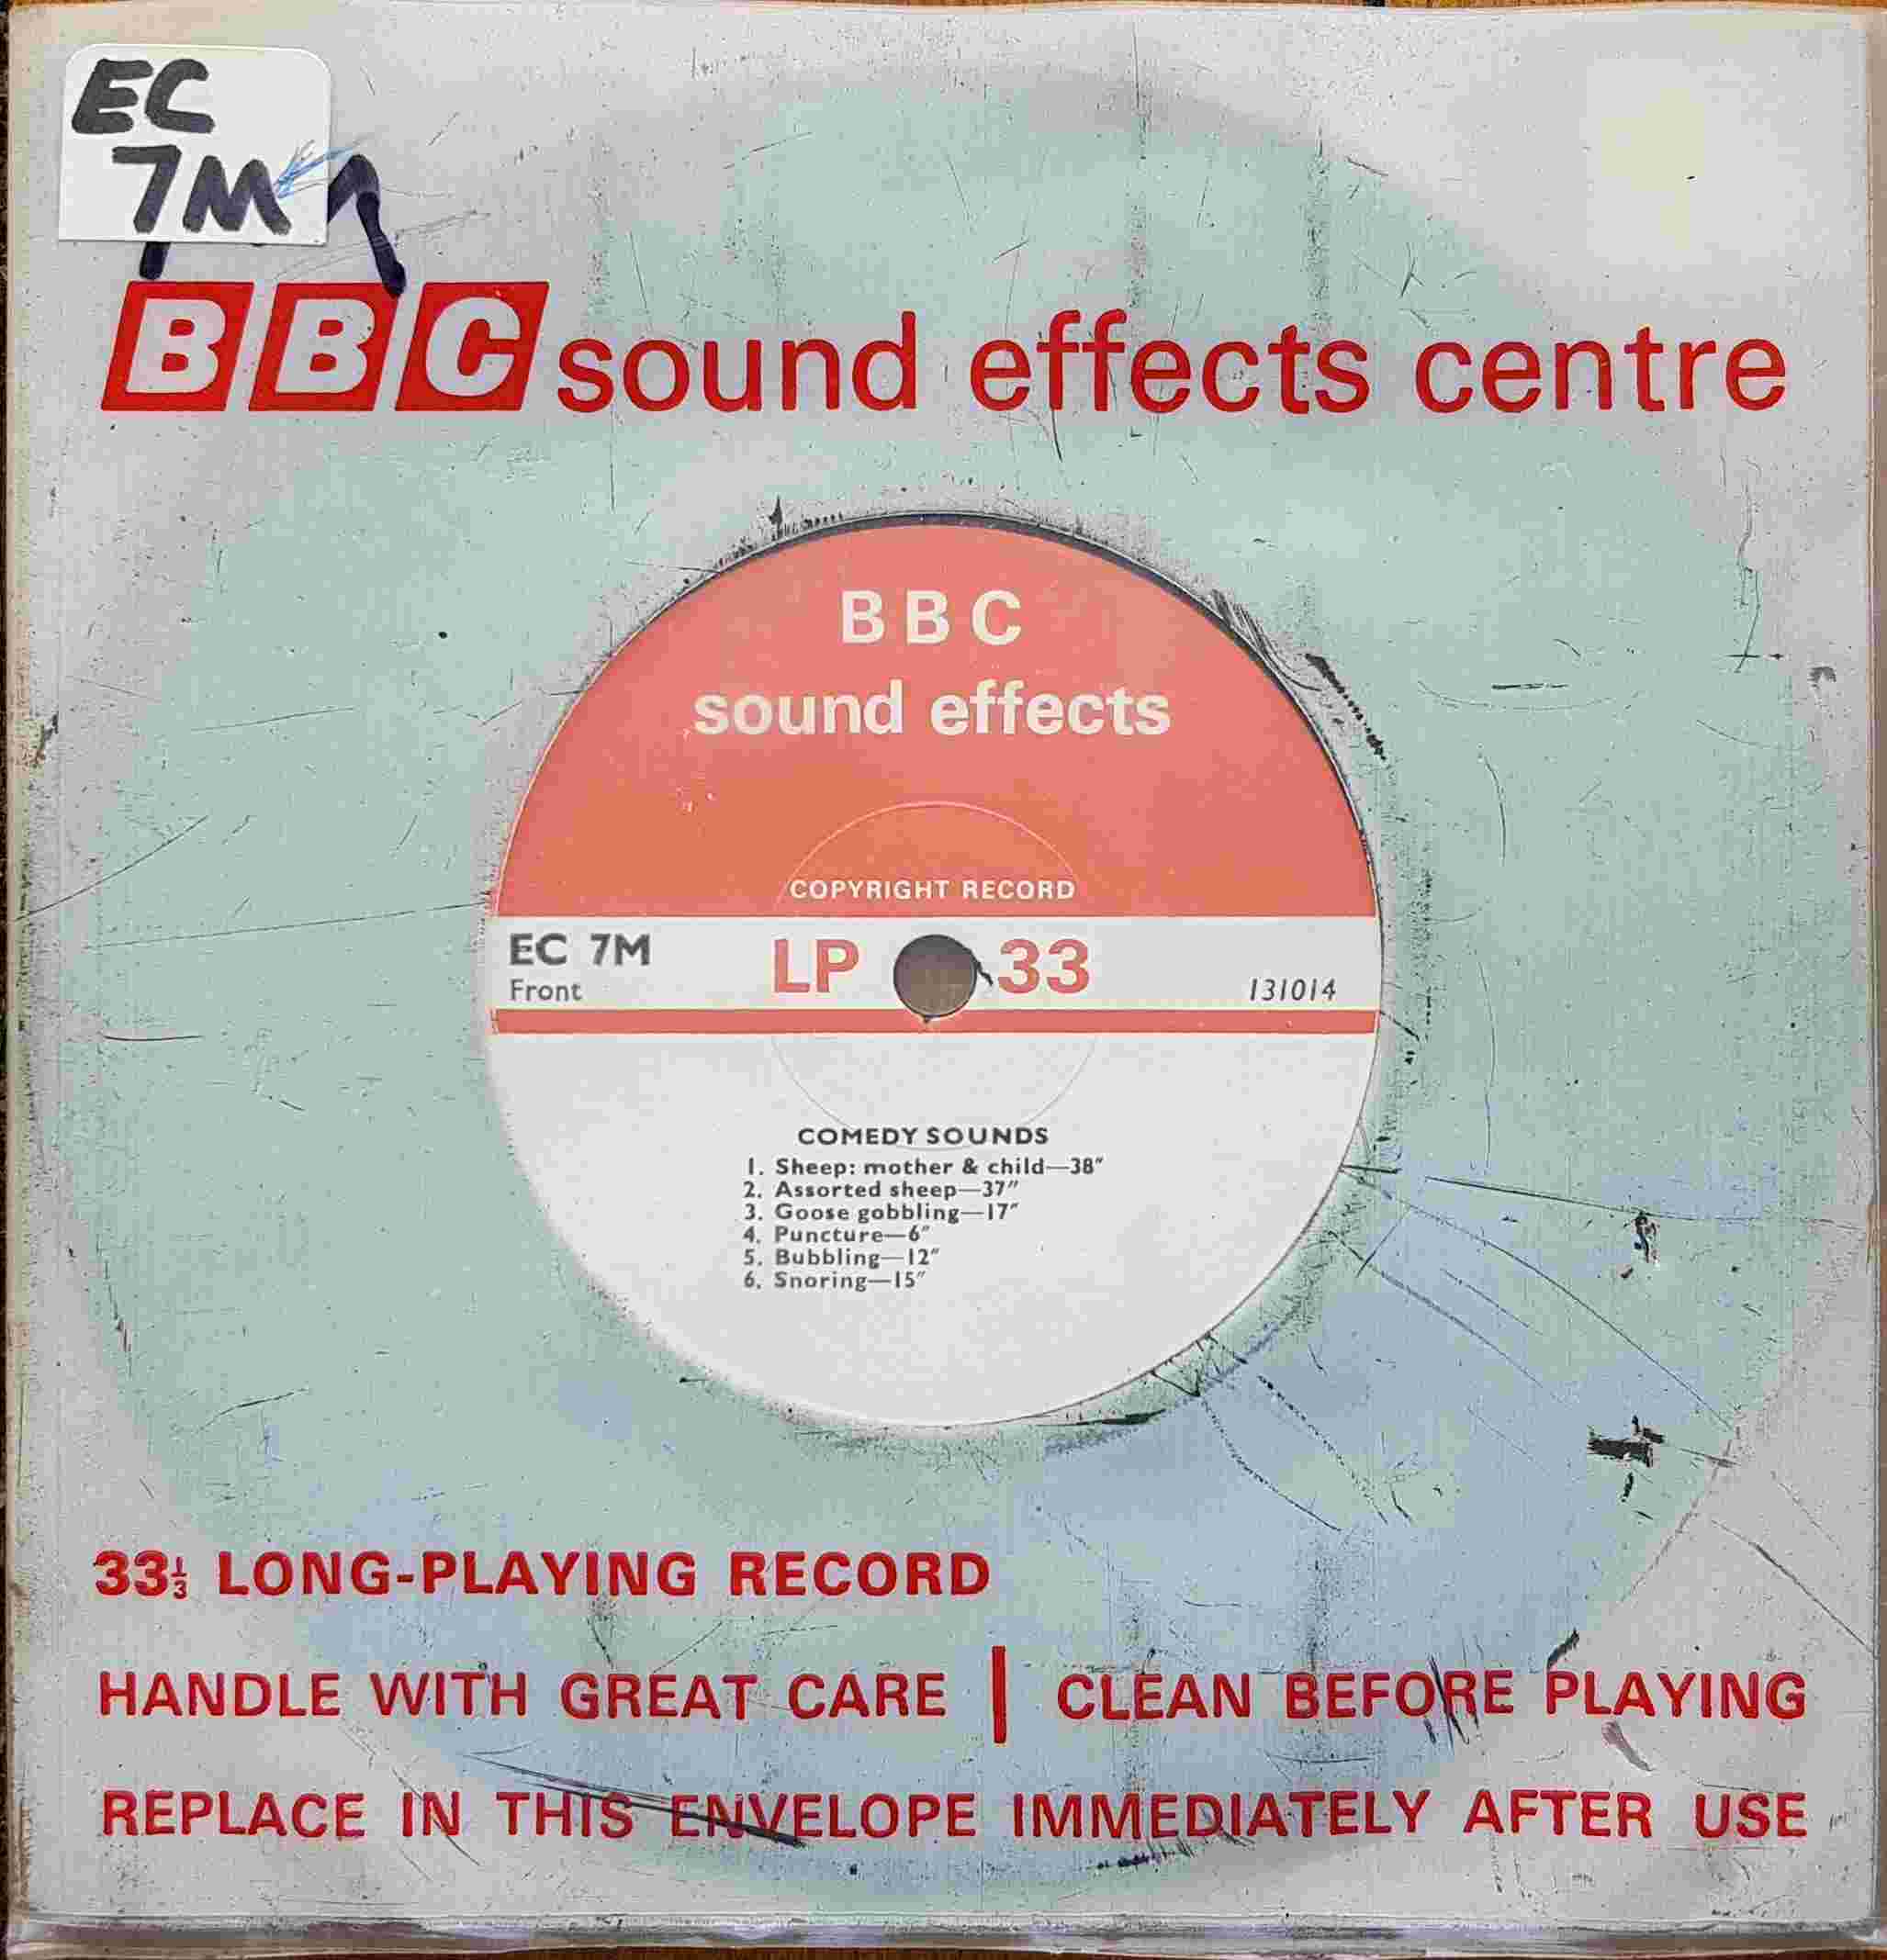 Picture of EC 7M Comedy sounds by artist Not registered from the BBC singles - Records and Tapes library